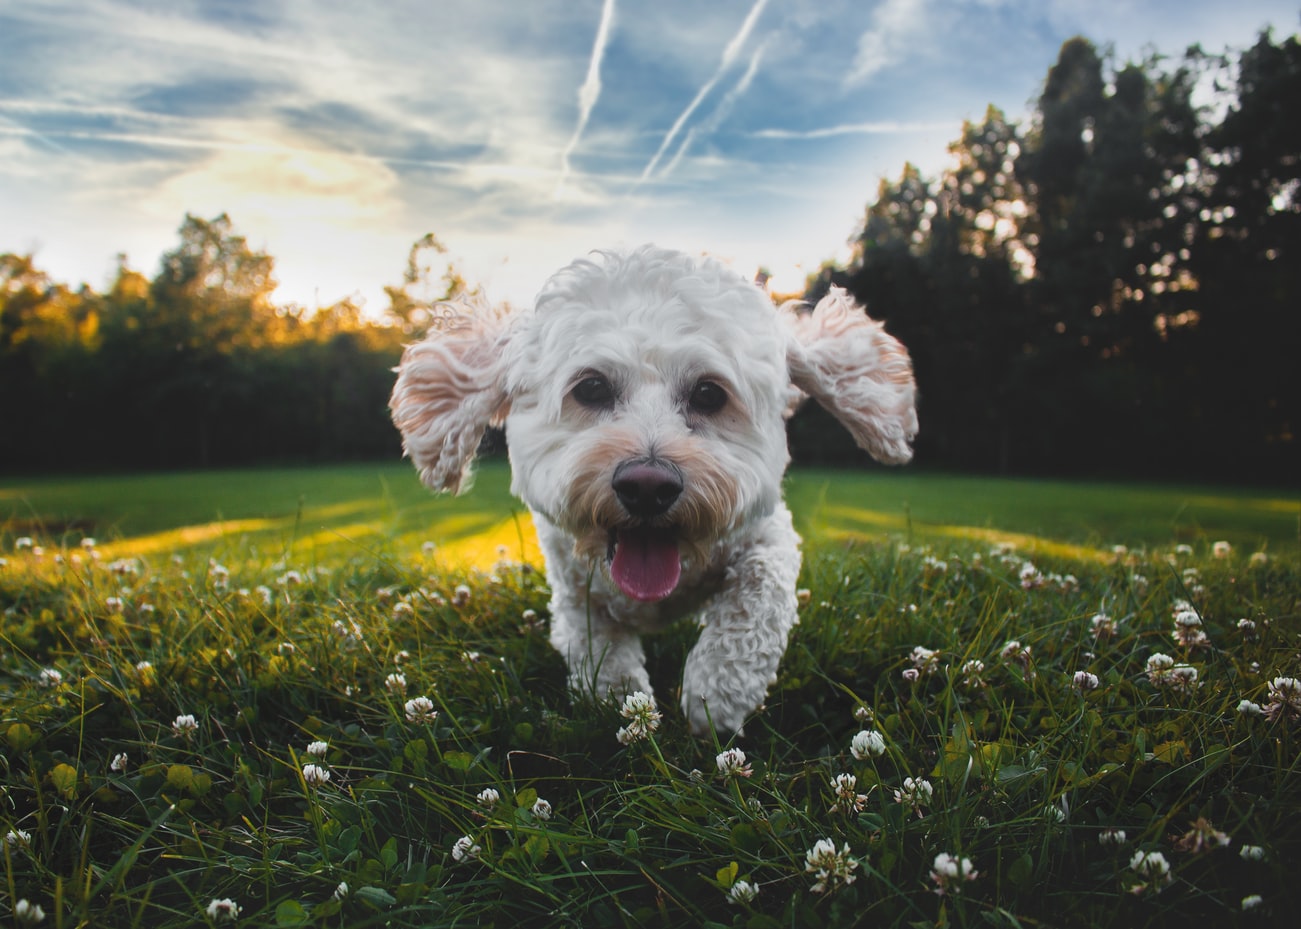 A small white dog running through a field at sunset